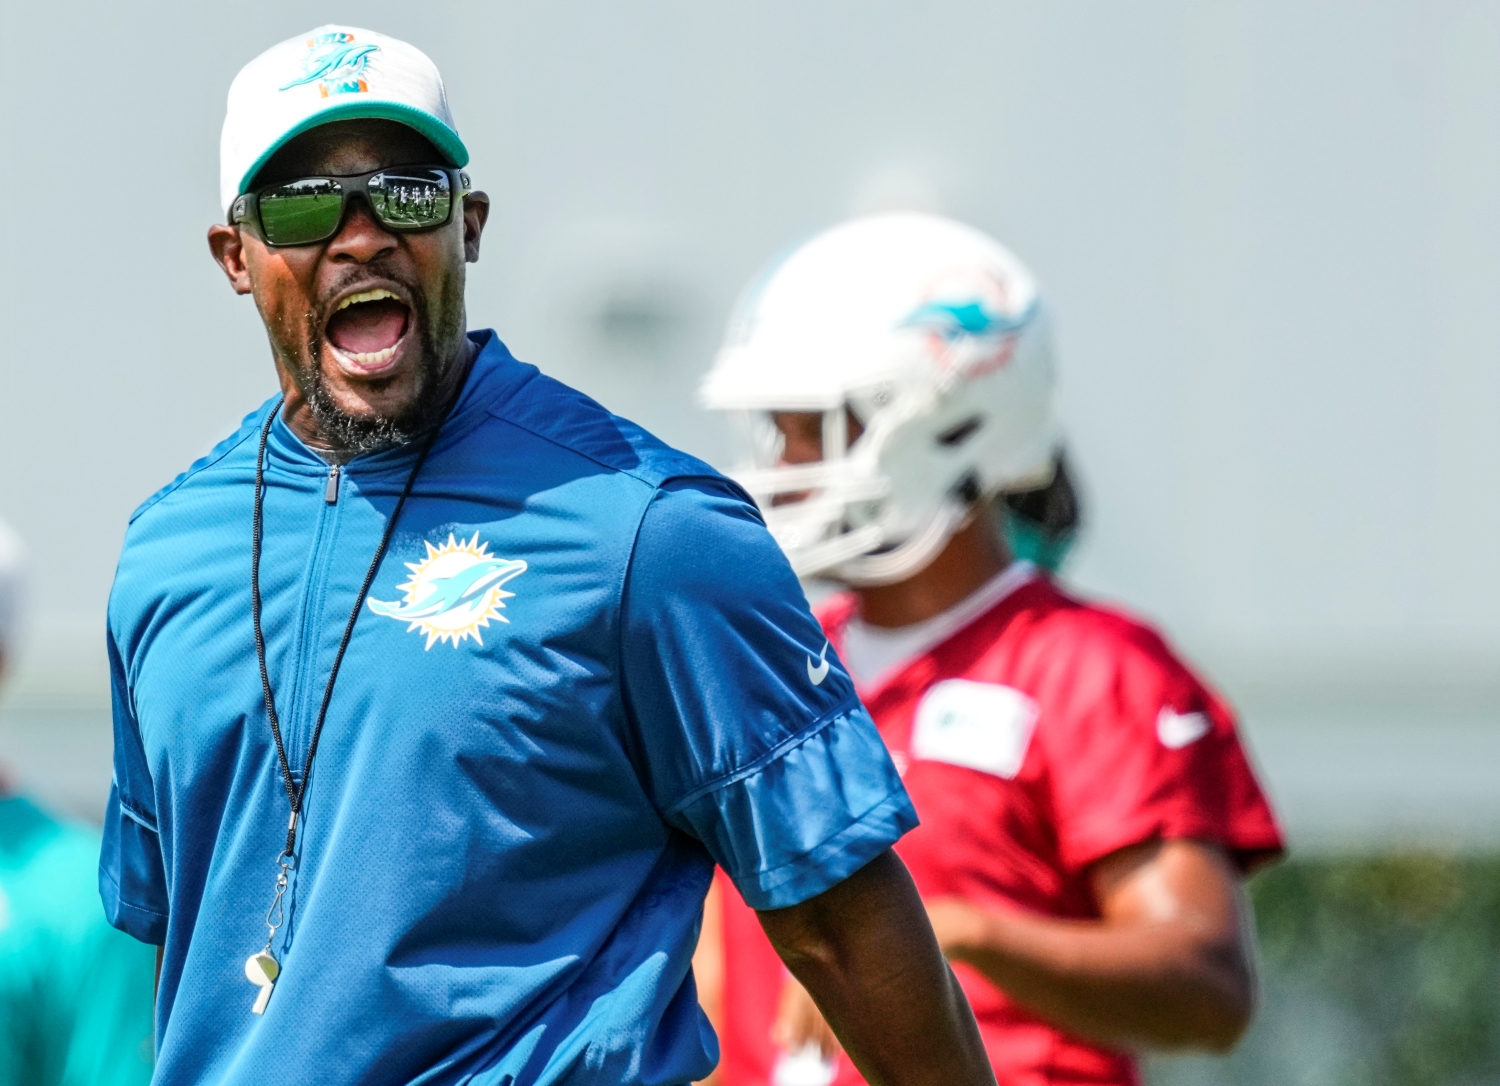 Miami Dolphins head coach Brian Flores giving instructions for practice drills during training camp as Tua Tagovailoa stands in the background.